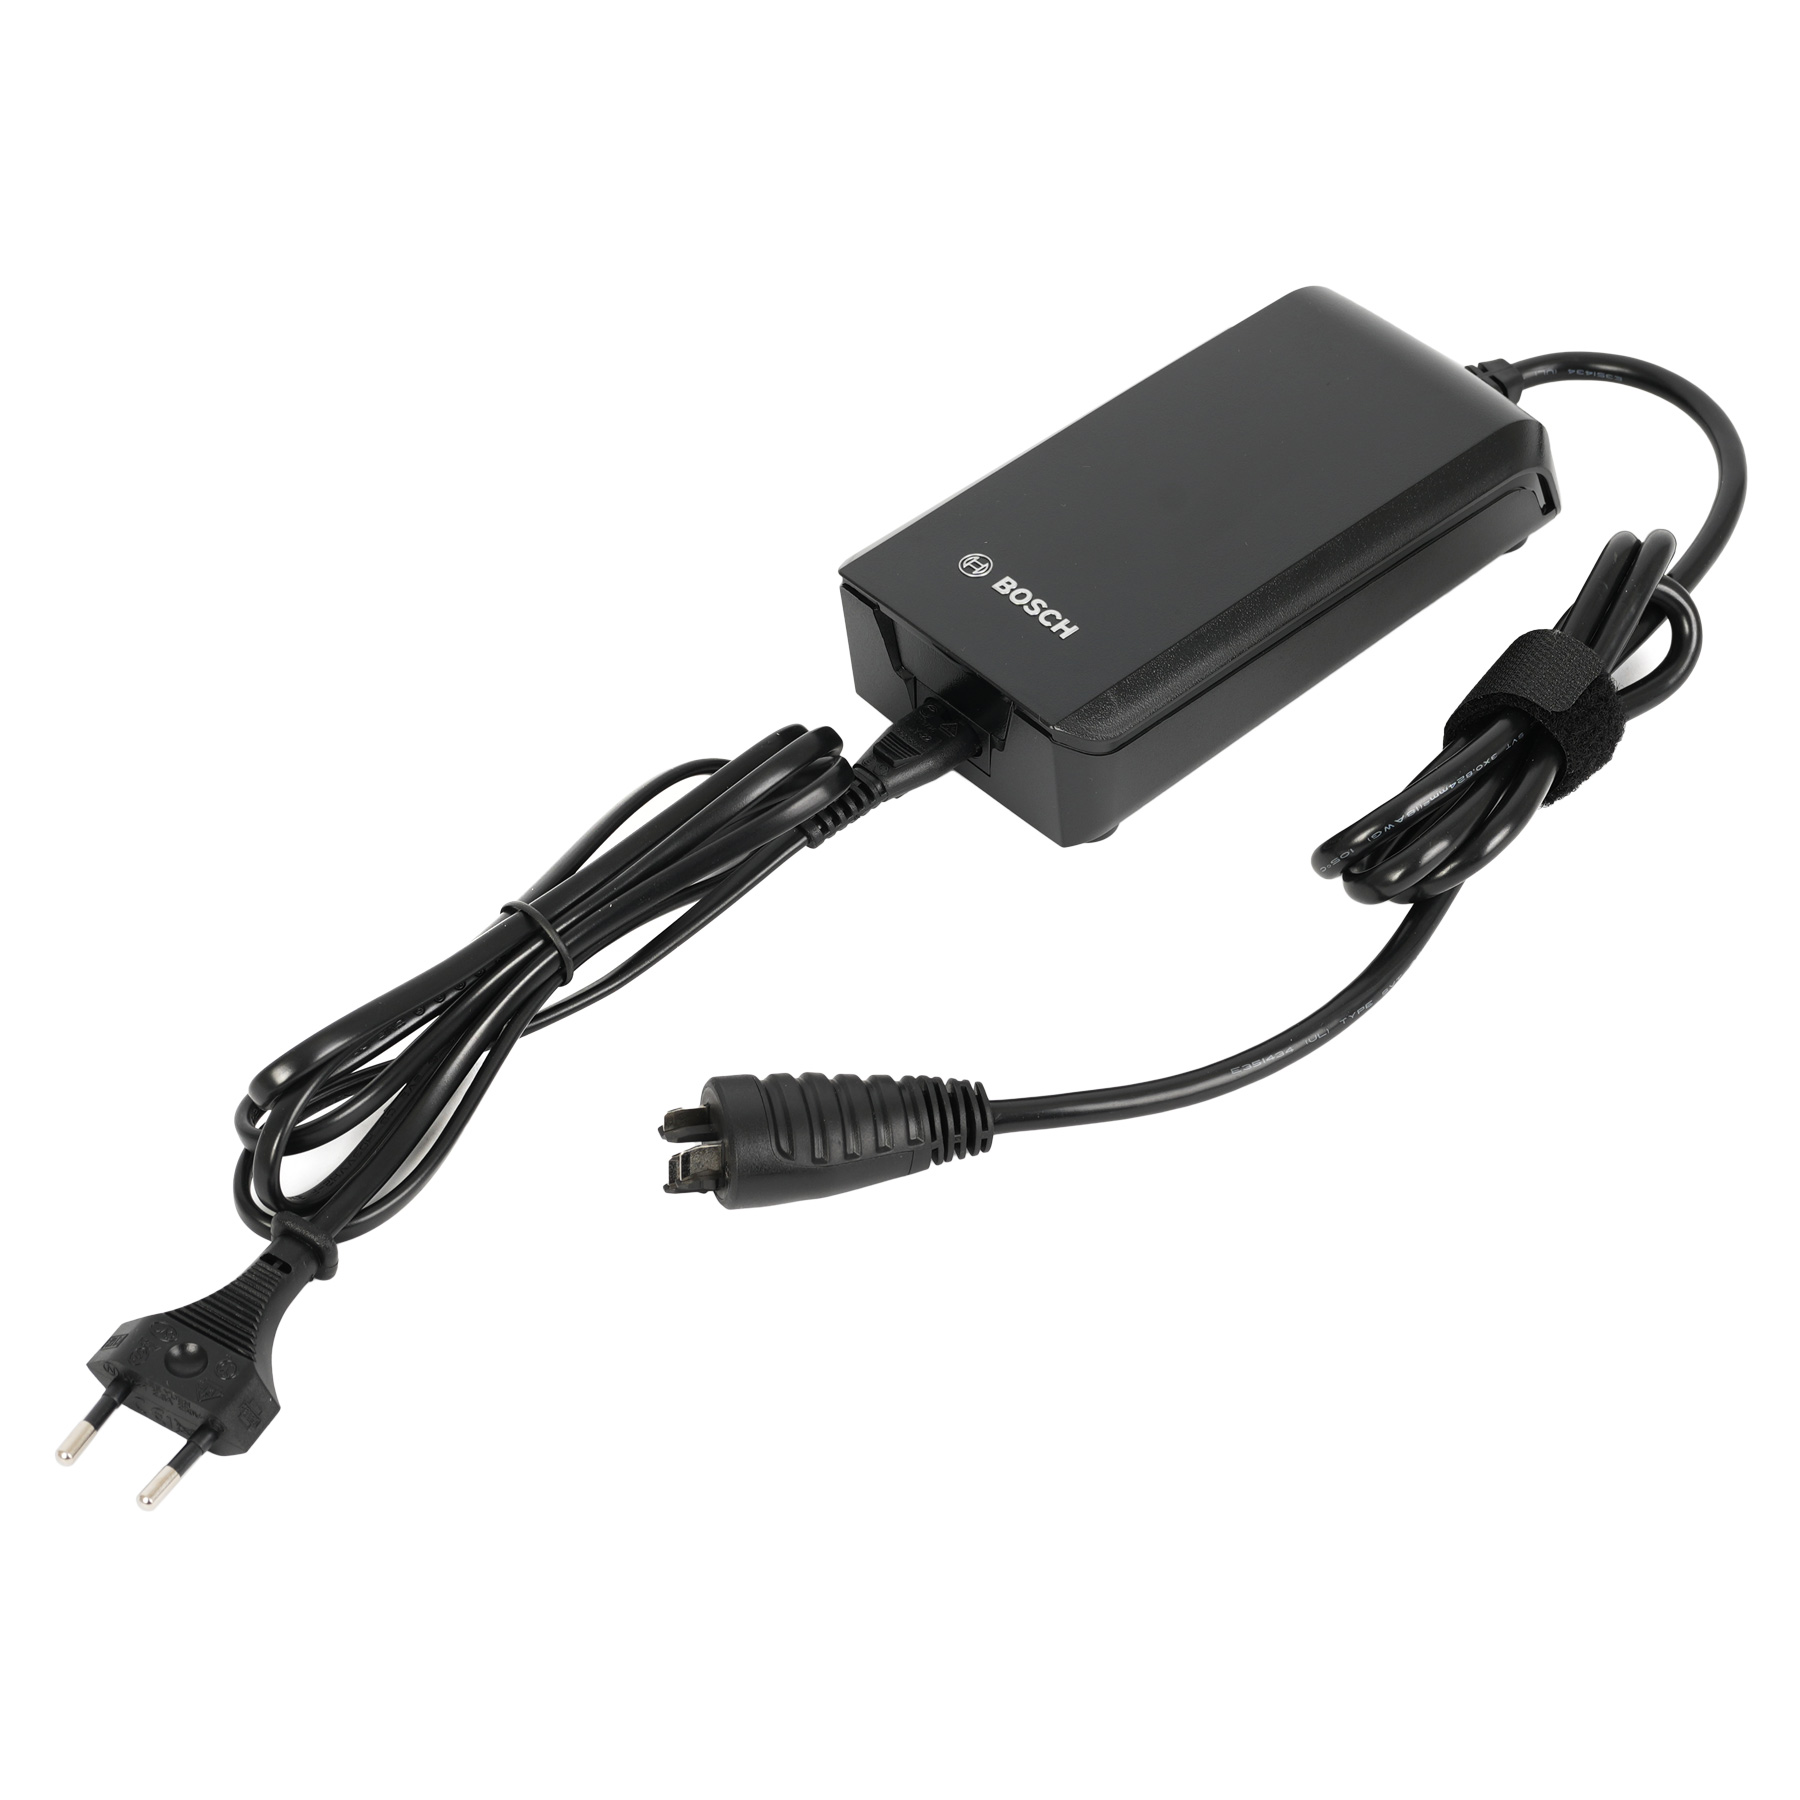 Productfoto van Bosch Compact Charger 2A with Power Cable - black